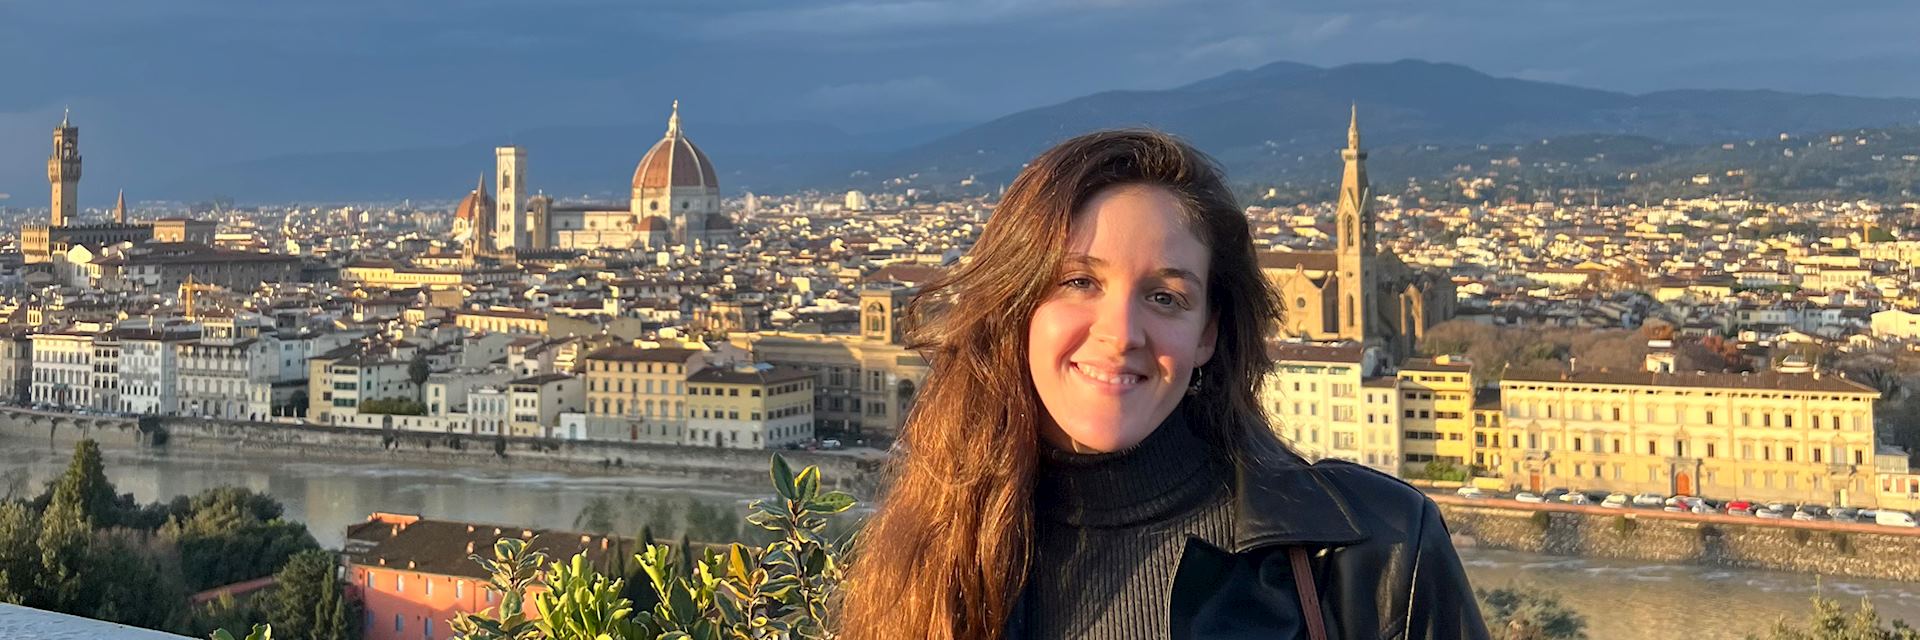 Michaela at Piazzale Michelangelo, Florence, Italy